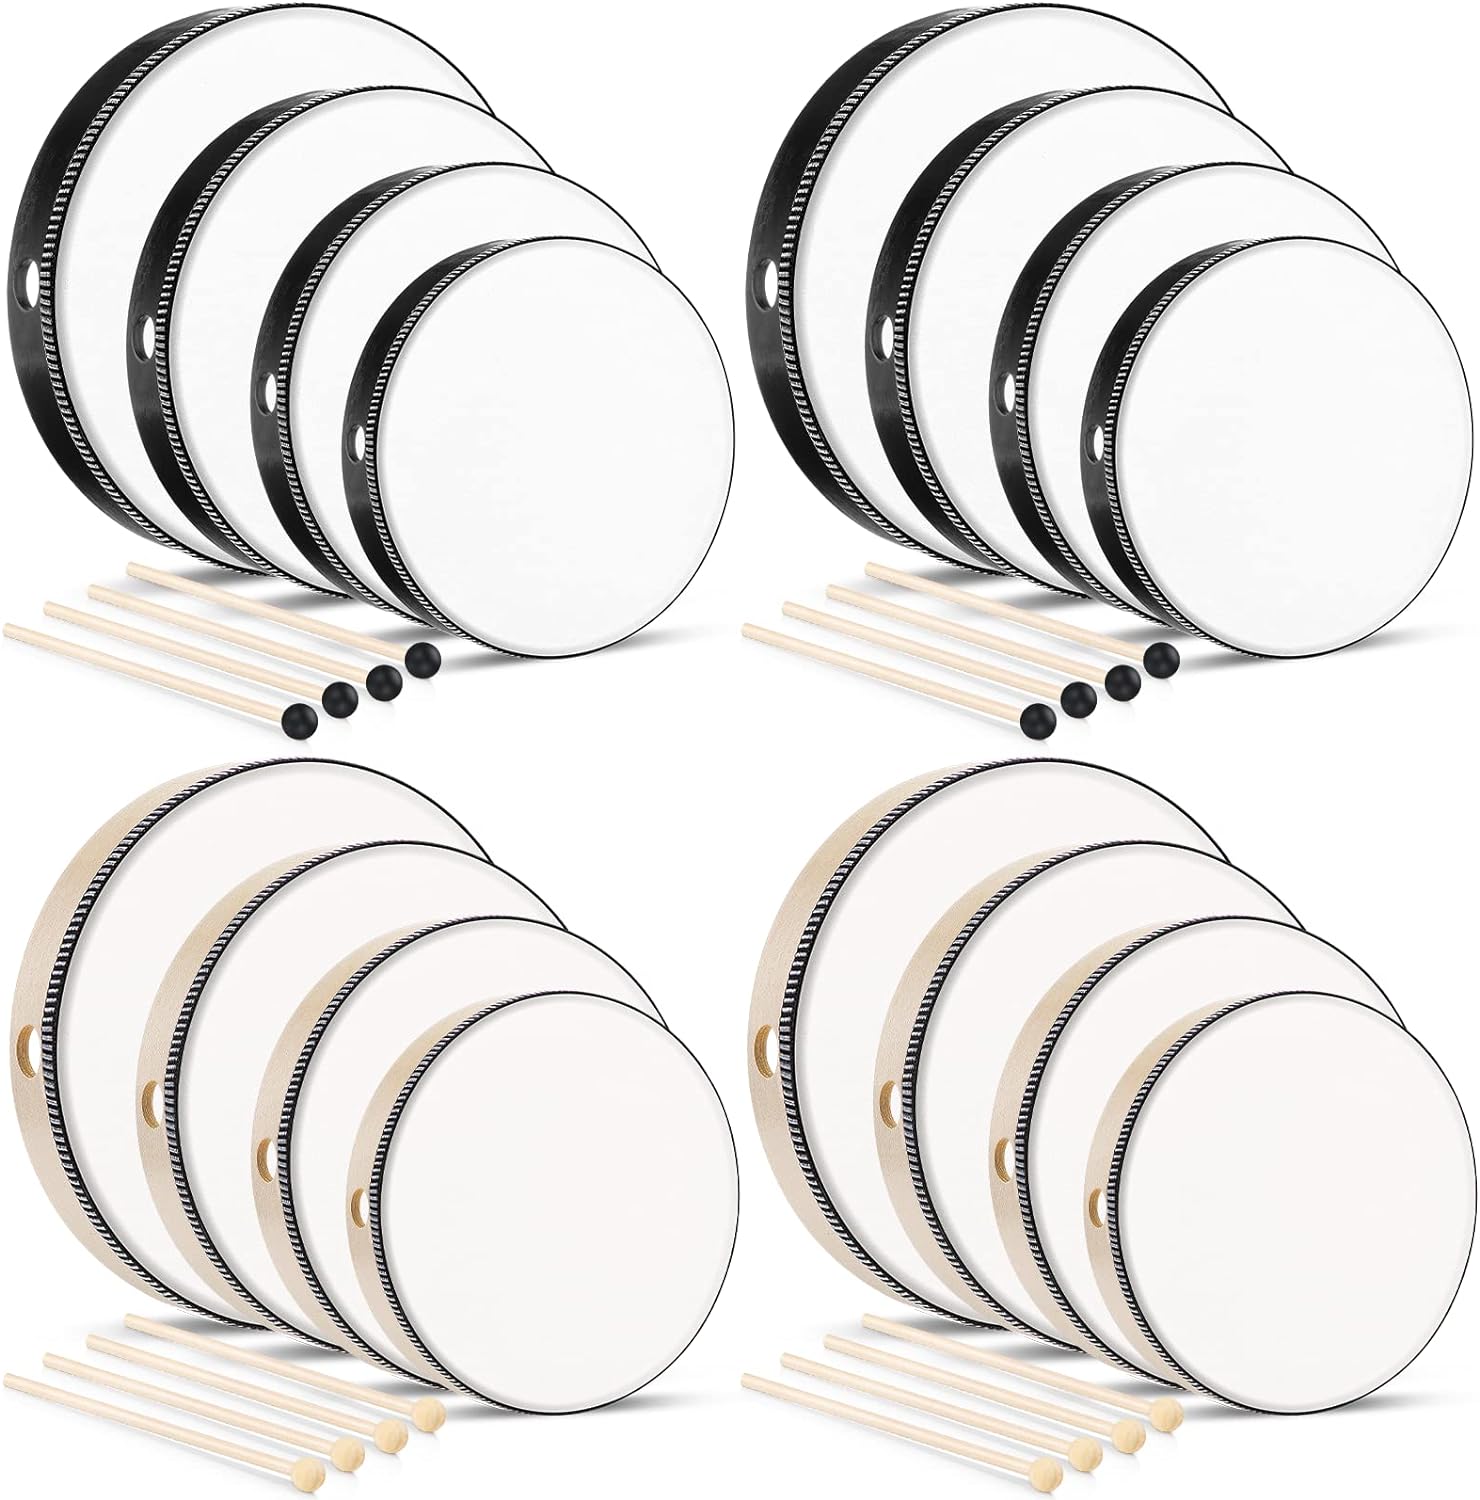 4 groups each containing 4 drums and 4 mallets